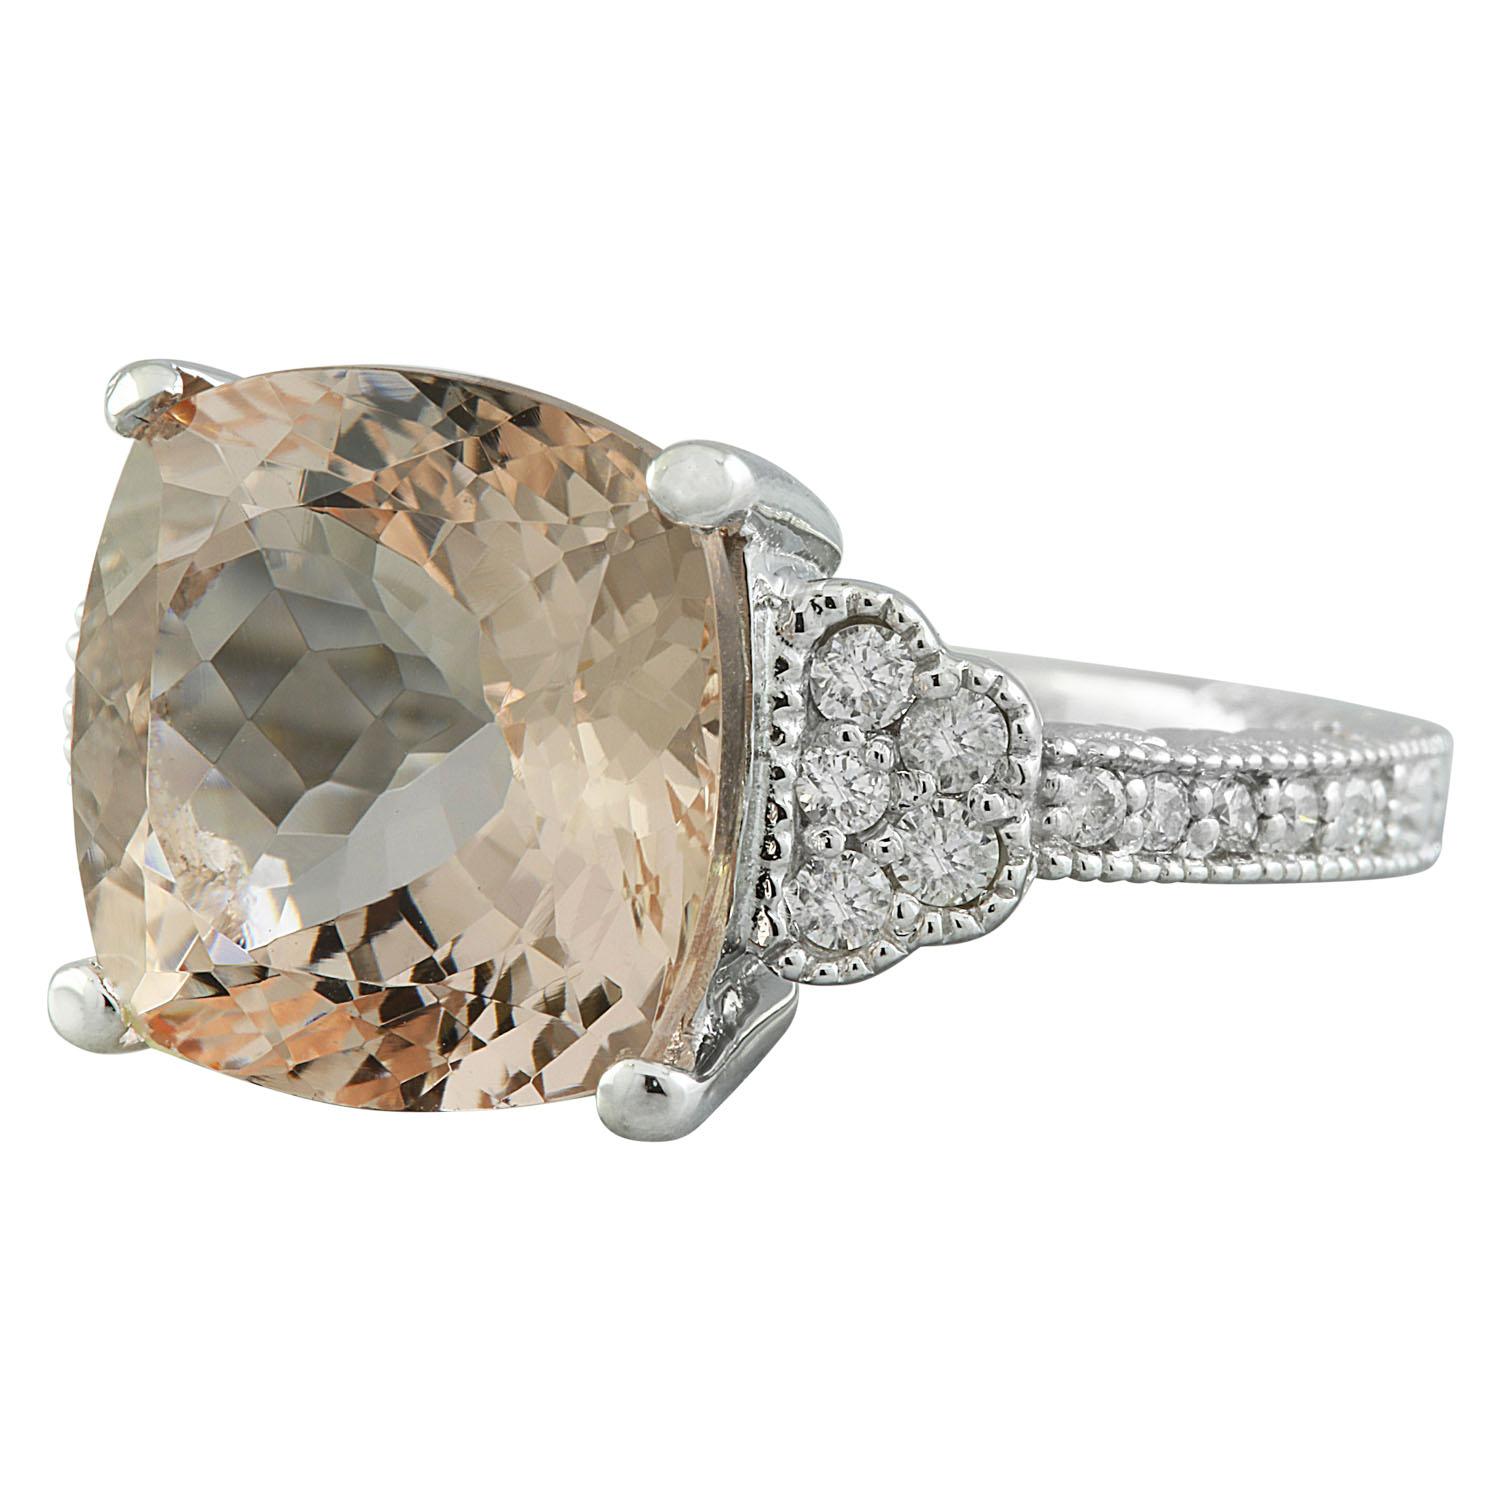 7.85 Carat Natural Morganite 14 Karat Solid White Gold Diamond Ring
Stamped: 14K 
Total Ring Weight: 7 Grams
Morganite Weight 7.60 Carat (12.00x12.00 Millimeters)
Diamond Weight: 0.25 carat (F-G Color, VS2-SI1 Clarity )
Quantity: 20
Face Measures: